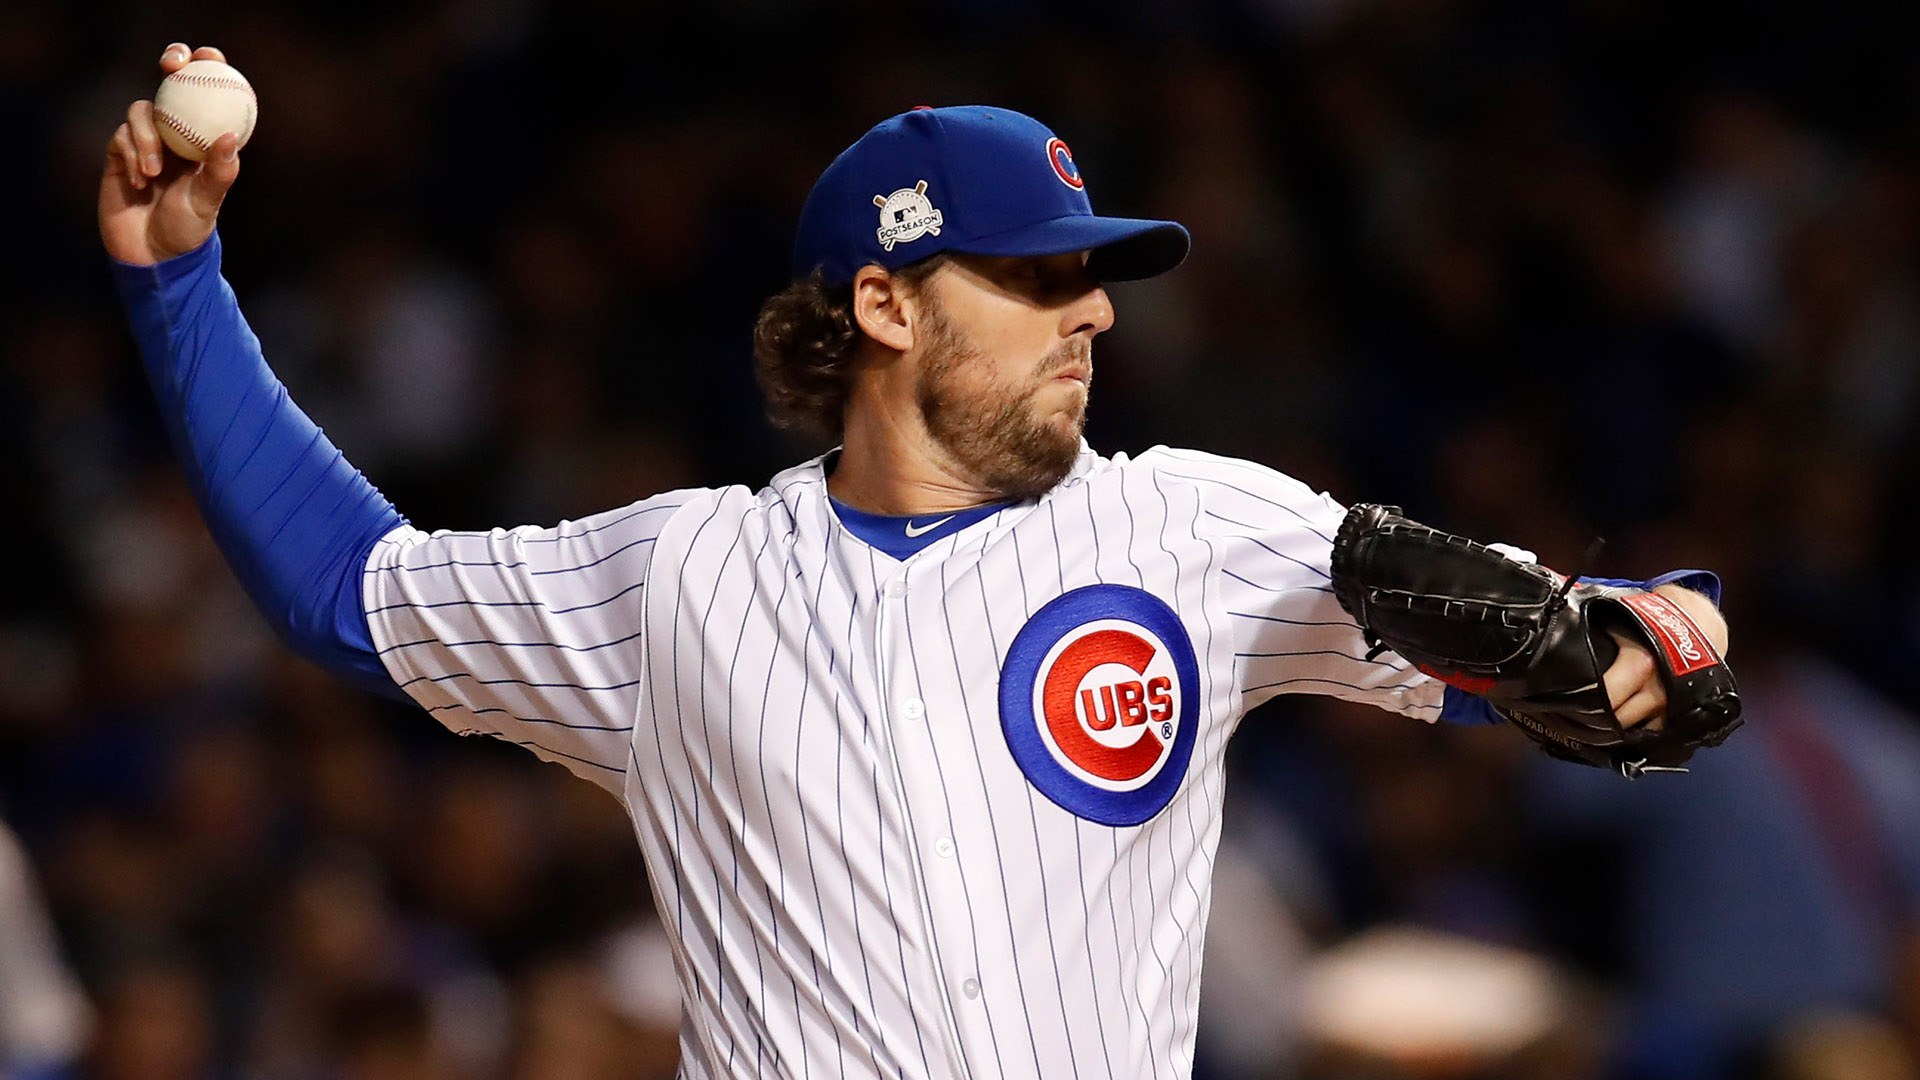 The Barber of Wrigleyville: John Lackey's Not Here for a Haircut